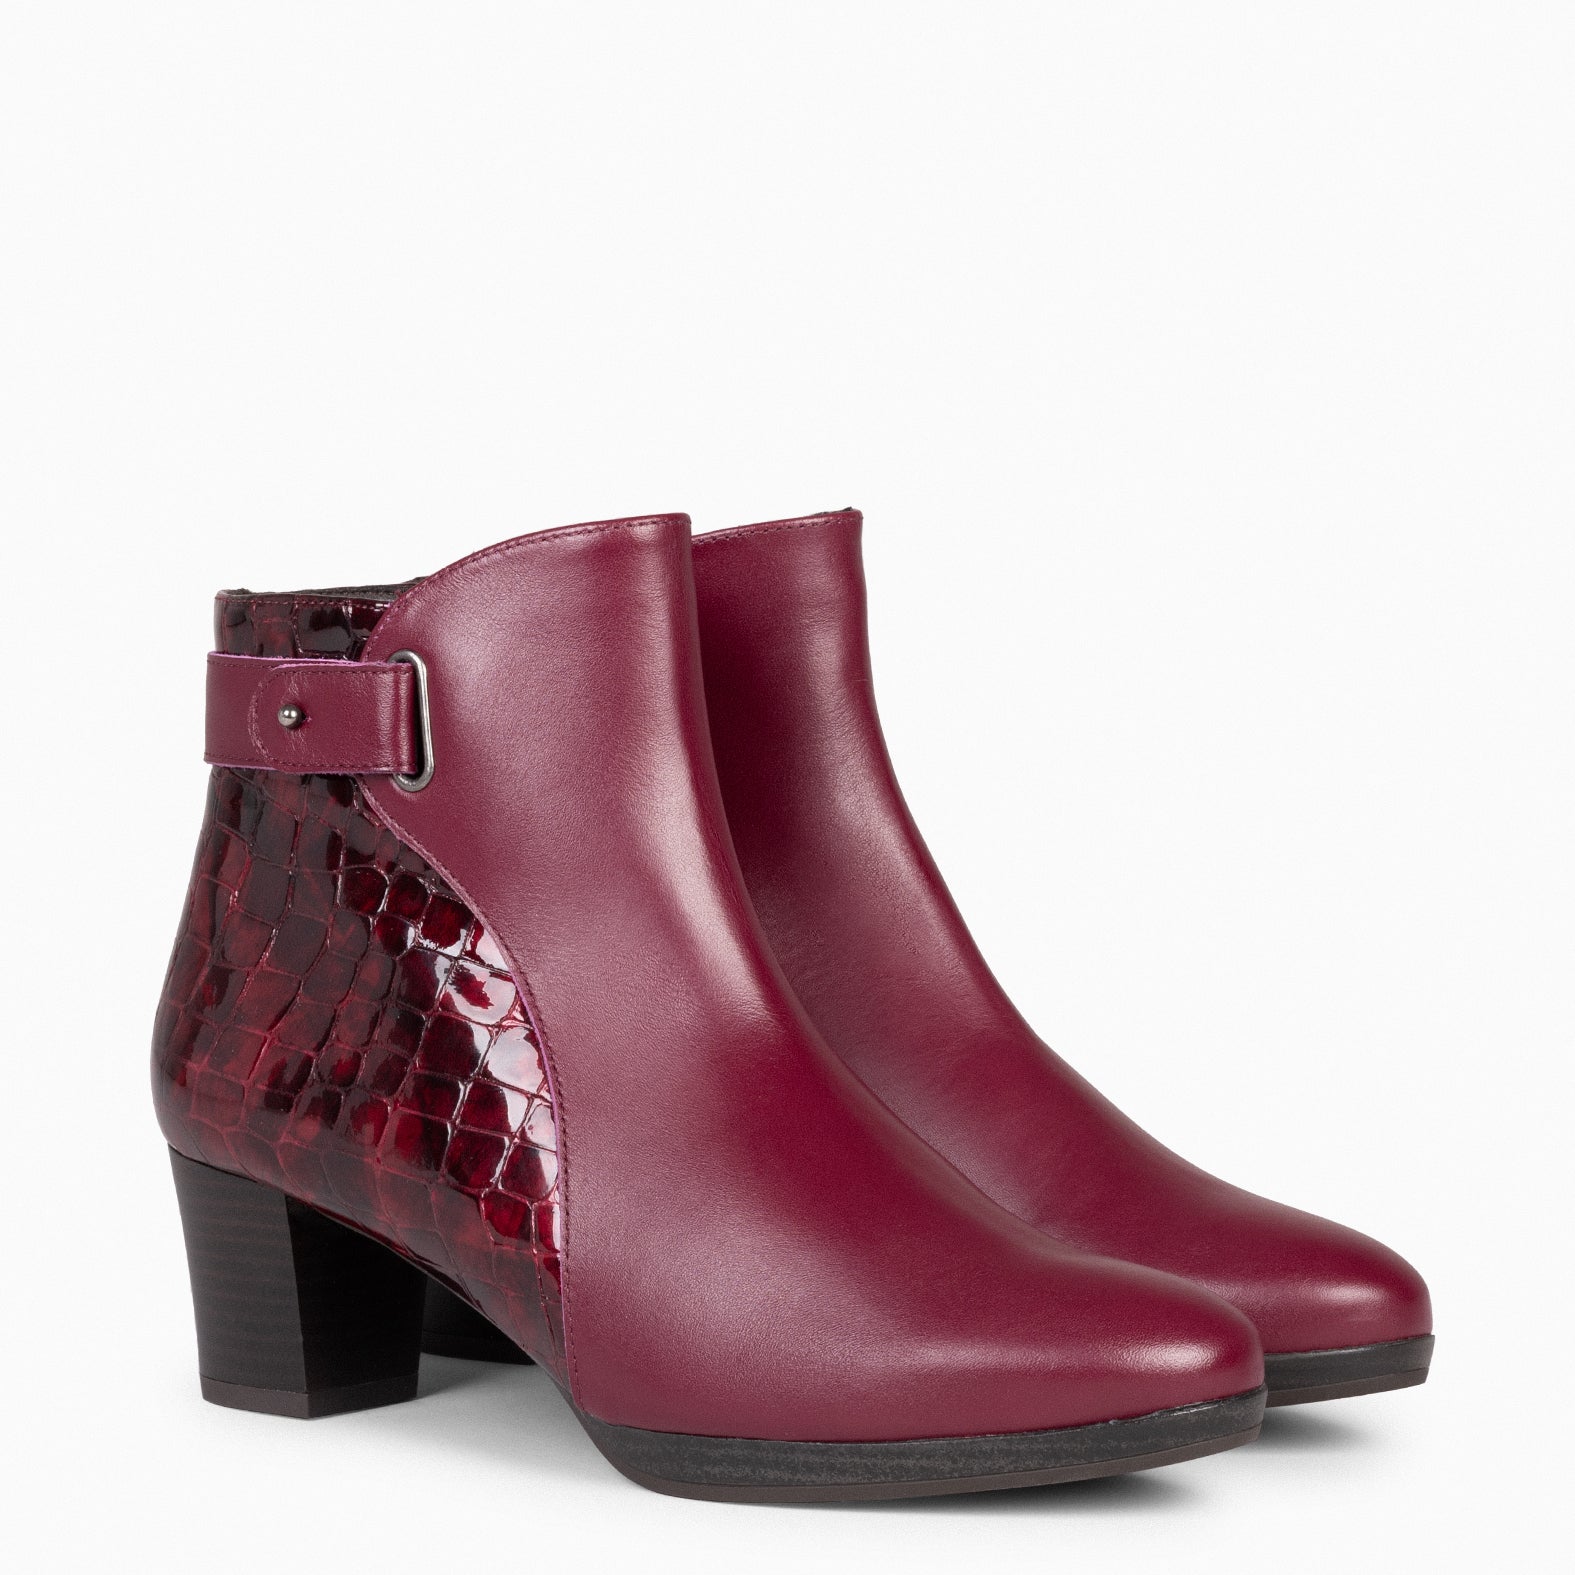 LENA – BURGUNDY Rounded Booties